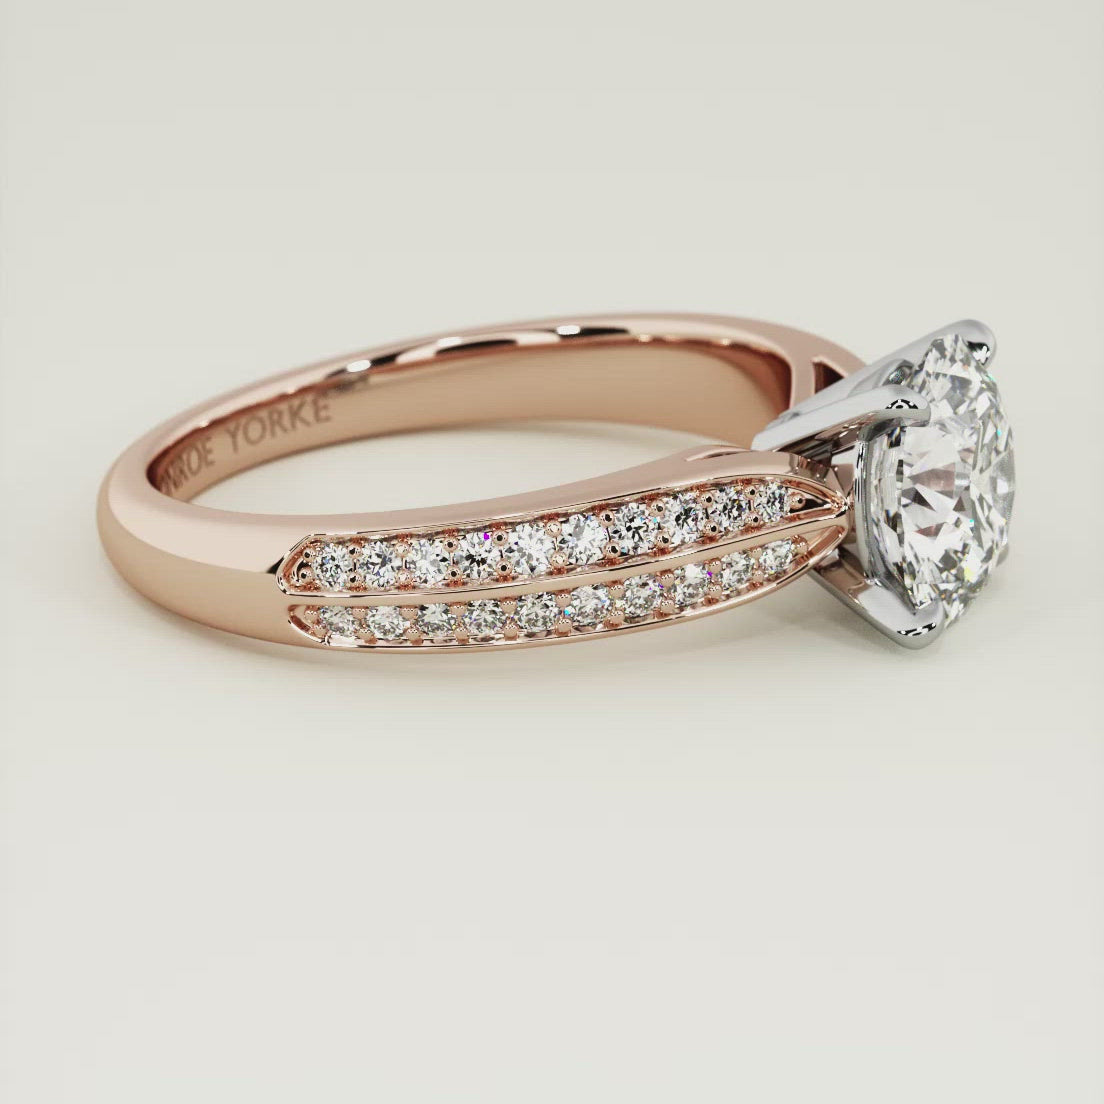 The beauty of a round brilliant cut diamond enhanced on this stunning engagement ring setting